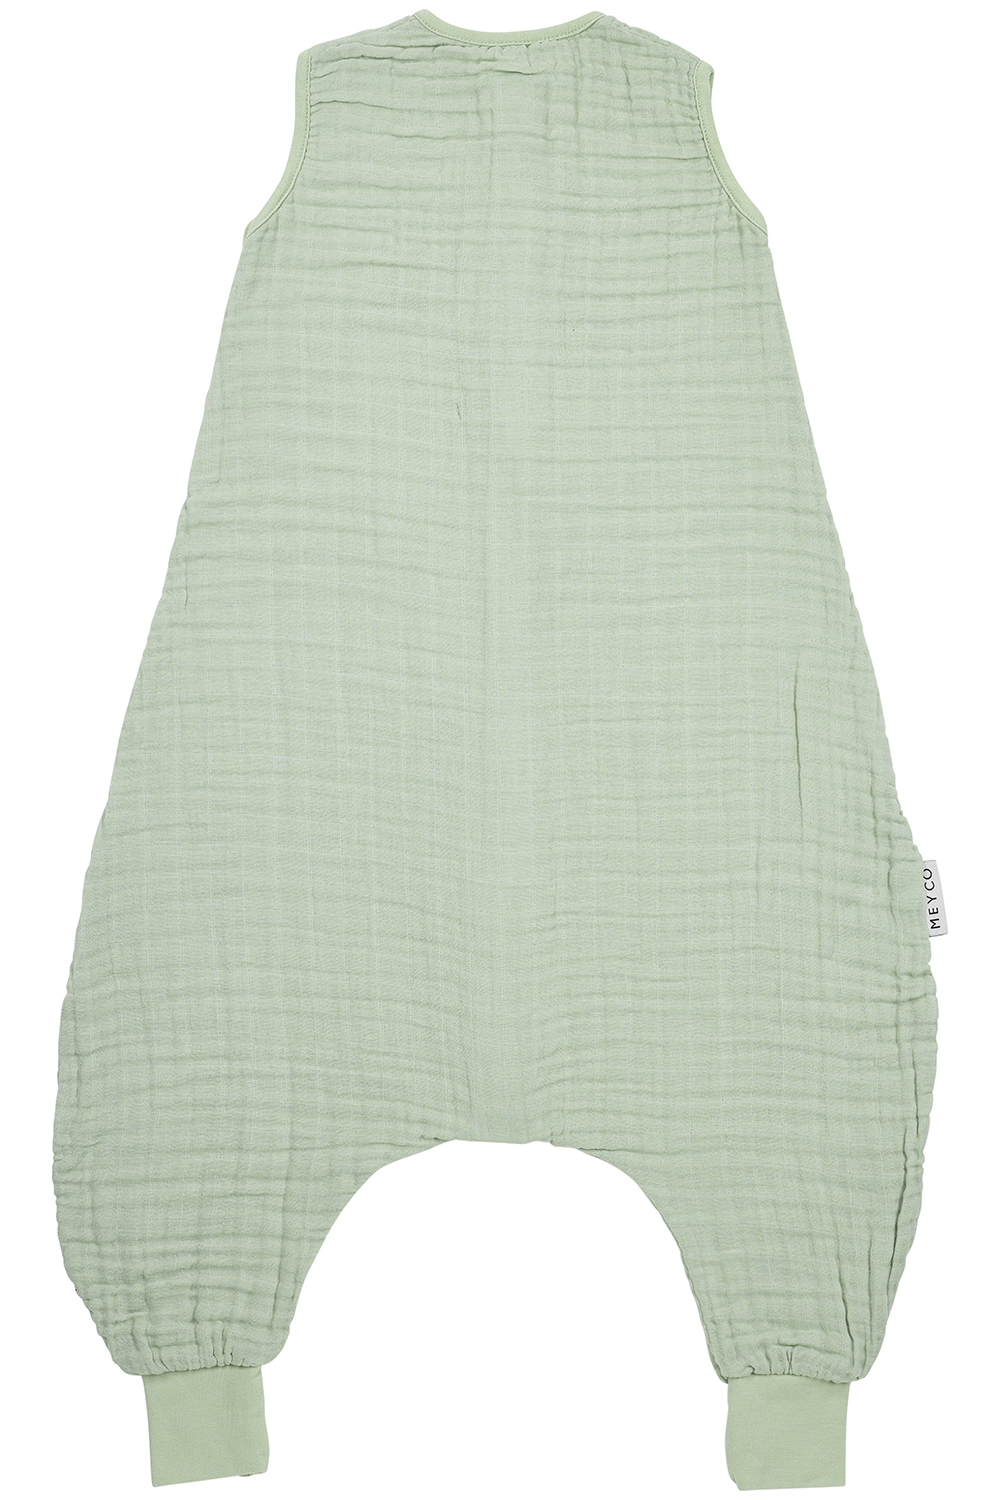 Baby sommer Schlafoverall Jumper pre-washed musselin Uni - soft green - 92cm